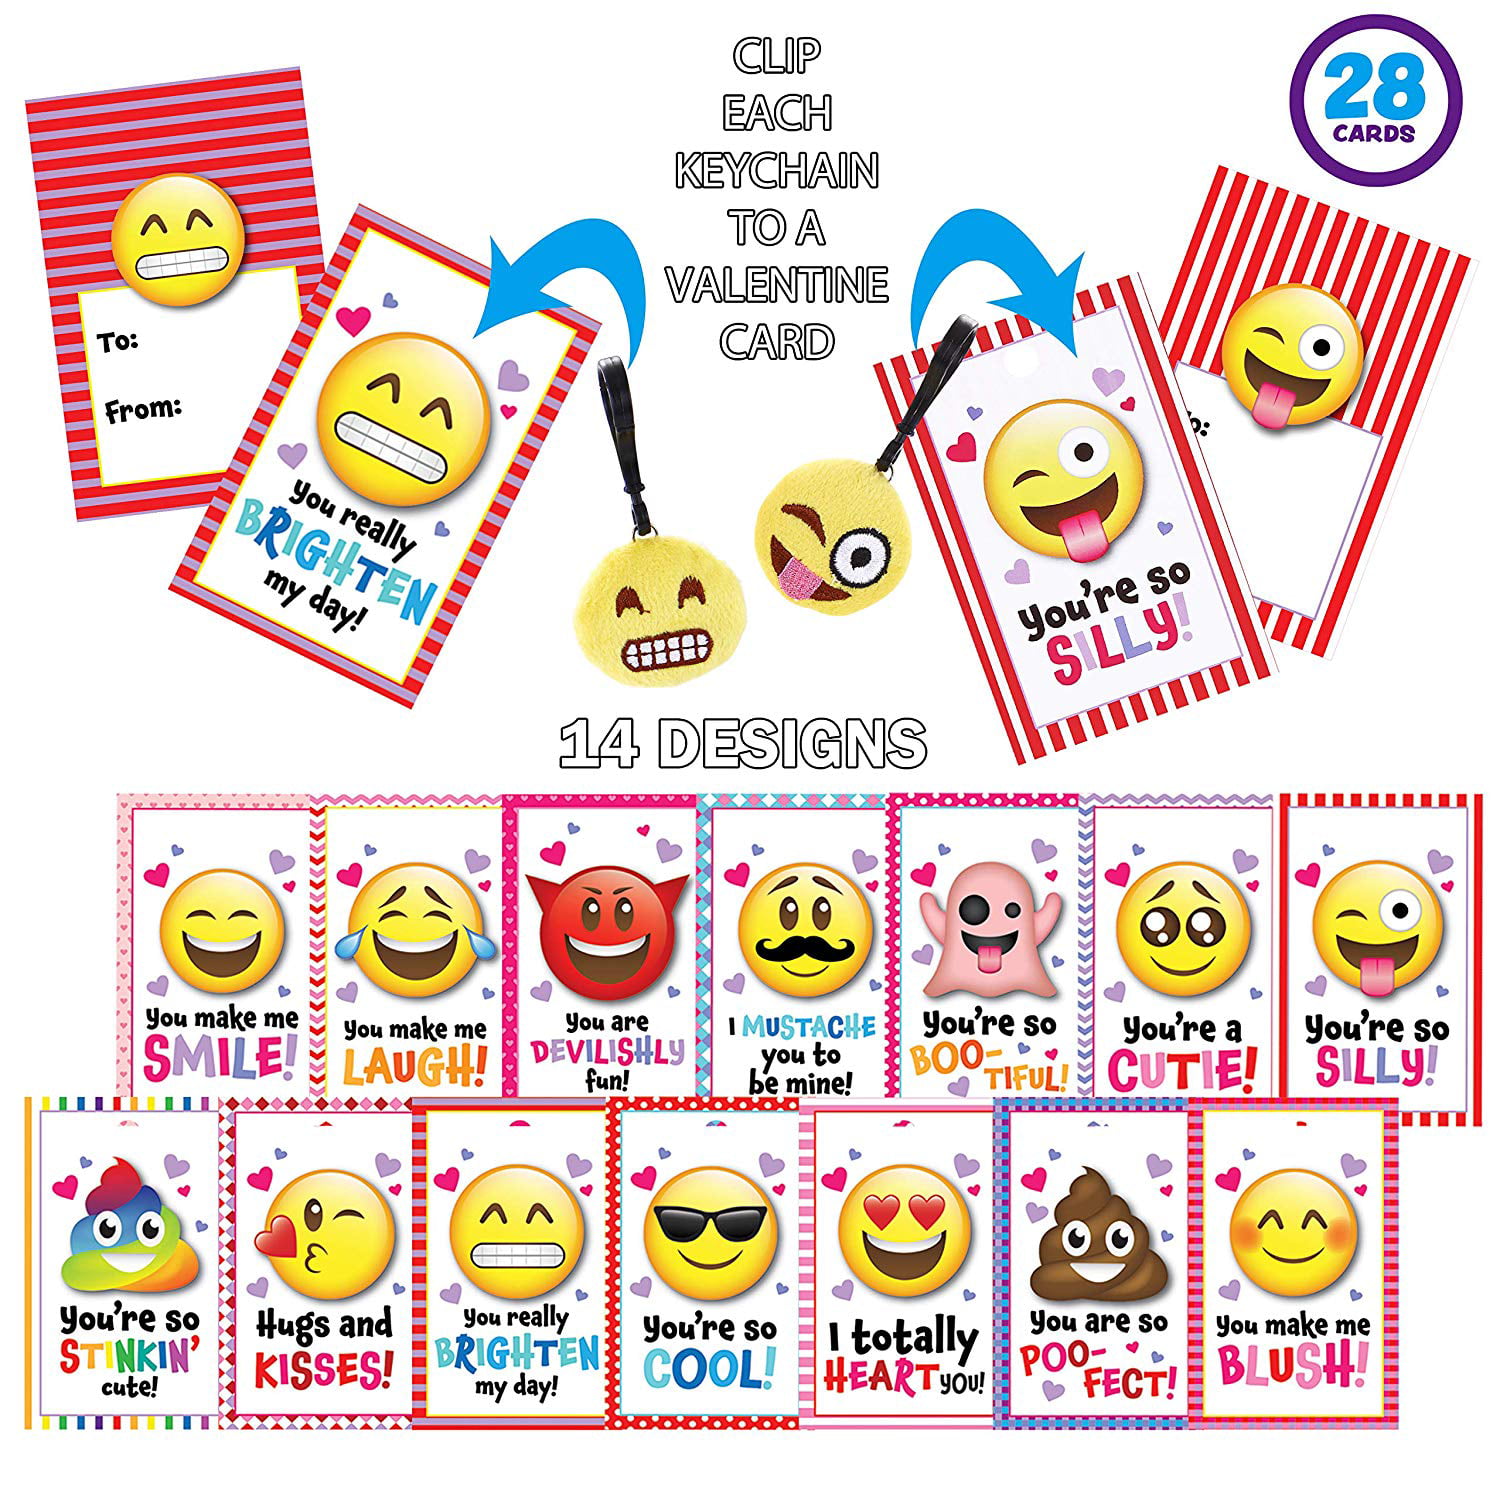 Game Prizes Emoji Party Favors Emoji Toys for Valentine Gift Exchange 28 Packs Kids Valentines Party Favors Set includes 28 Emoji Keychains Filled Hearts and Valentine’s Day Cards for Classroom Exchange 